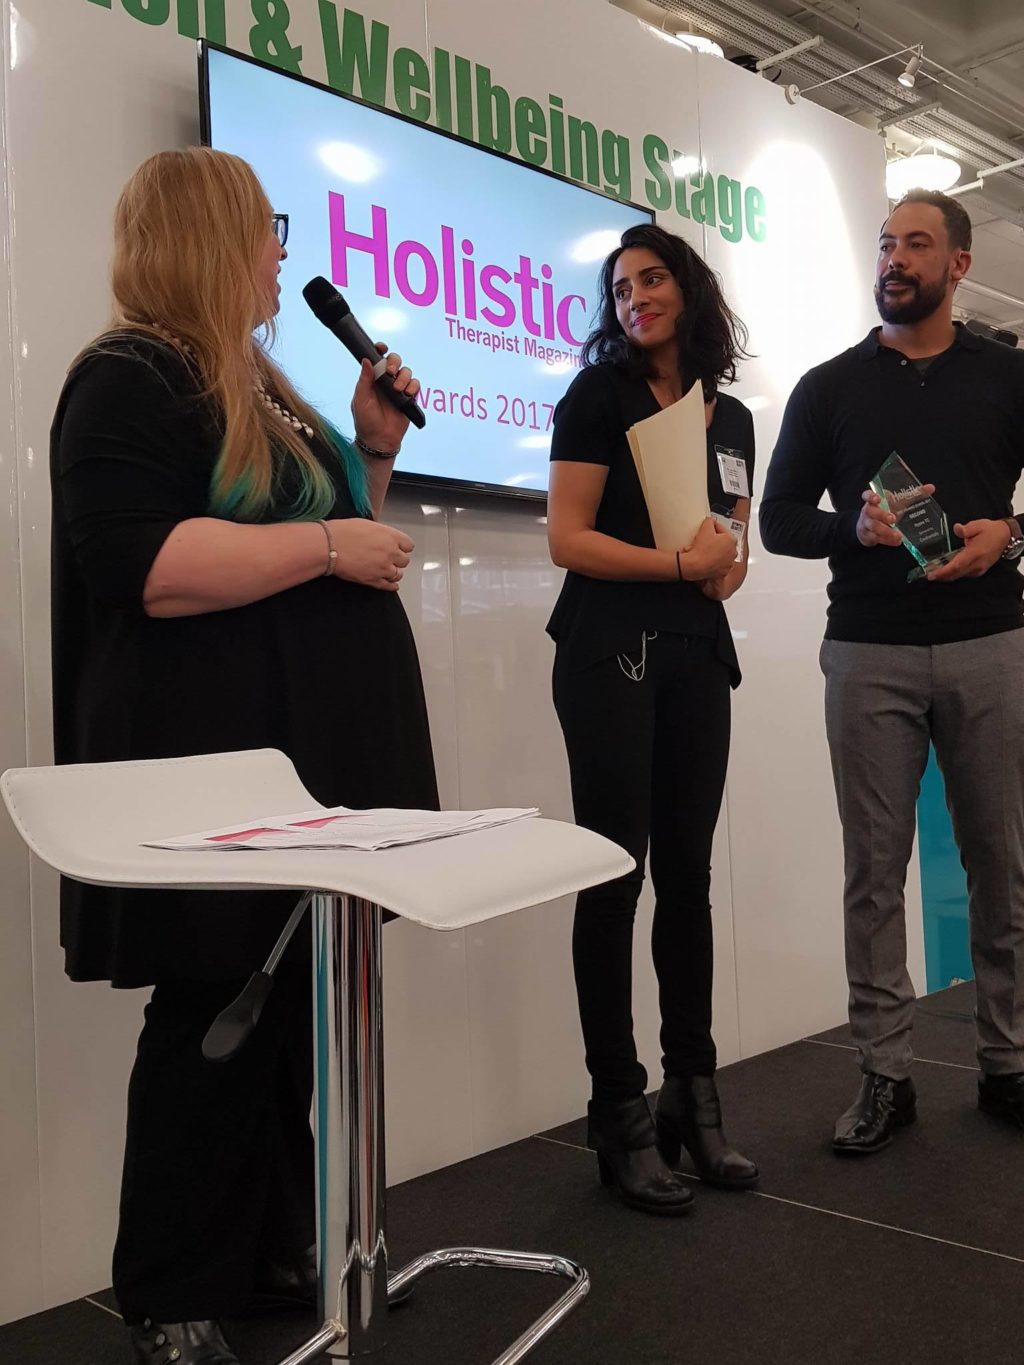 Holistic therapist magazine Holistic Business Awards 2nd place hypnotc hypnotherapy training company 2017 winner dr kate beaven marks